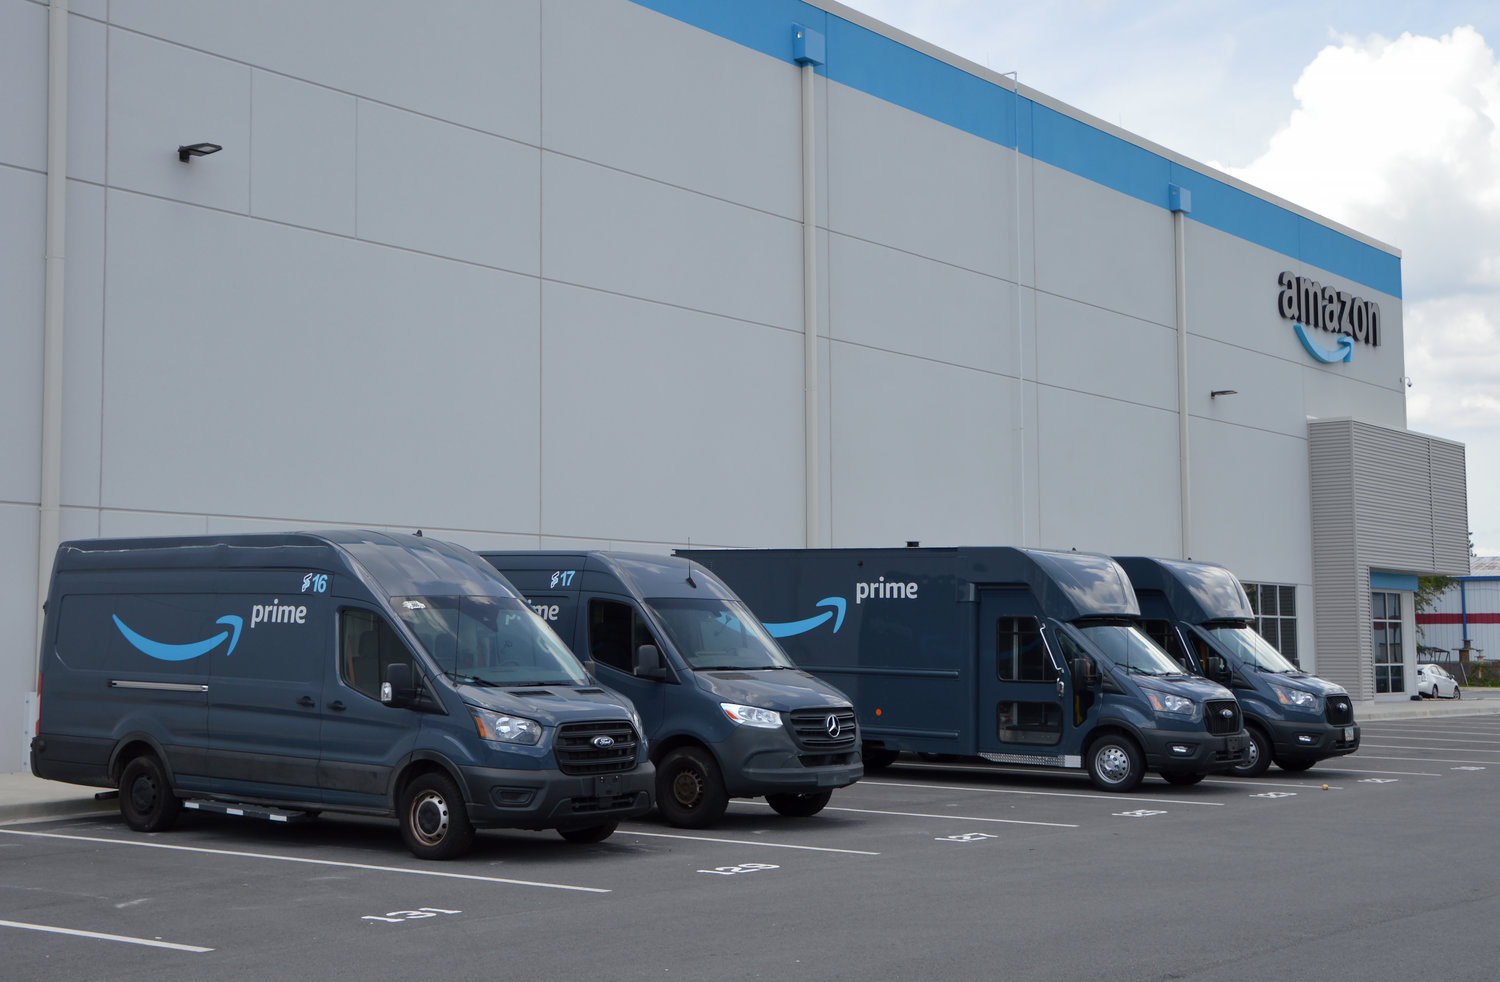 Amazon Prime delivery vehicles sit parked outside a distribution center in Doraville, Ga., July 27, 2022. (Christian Index/Henry Durand, File)